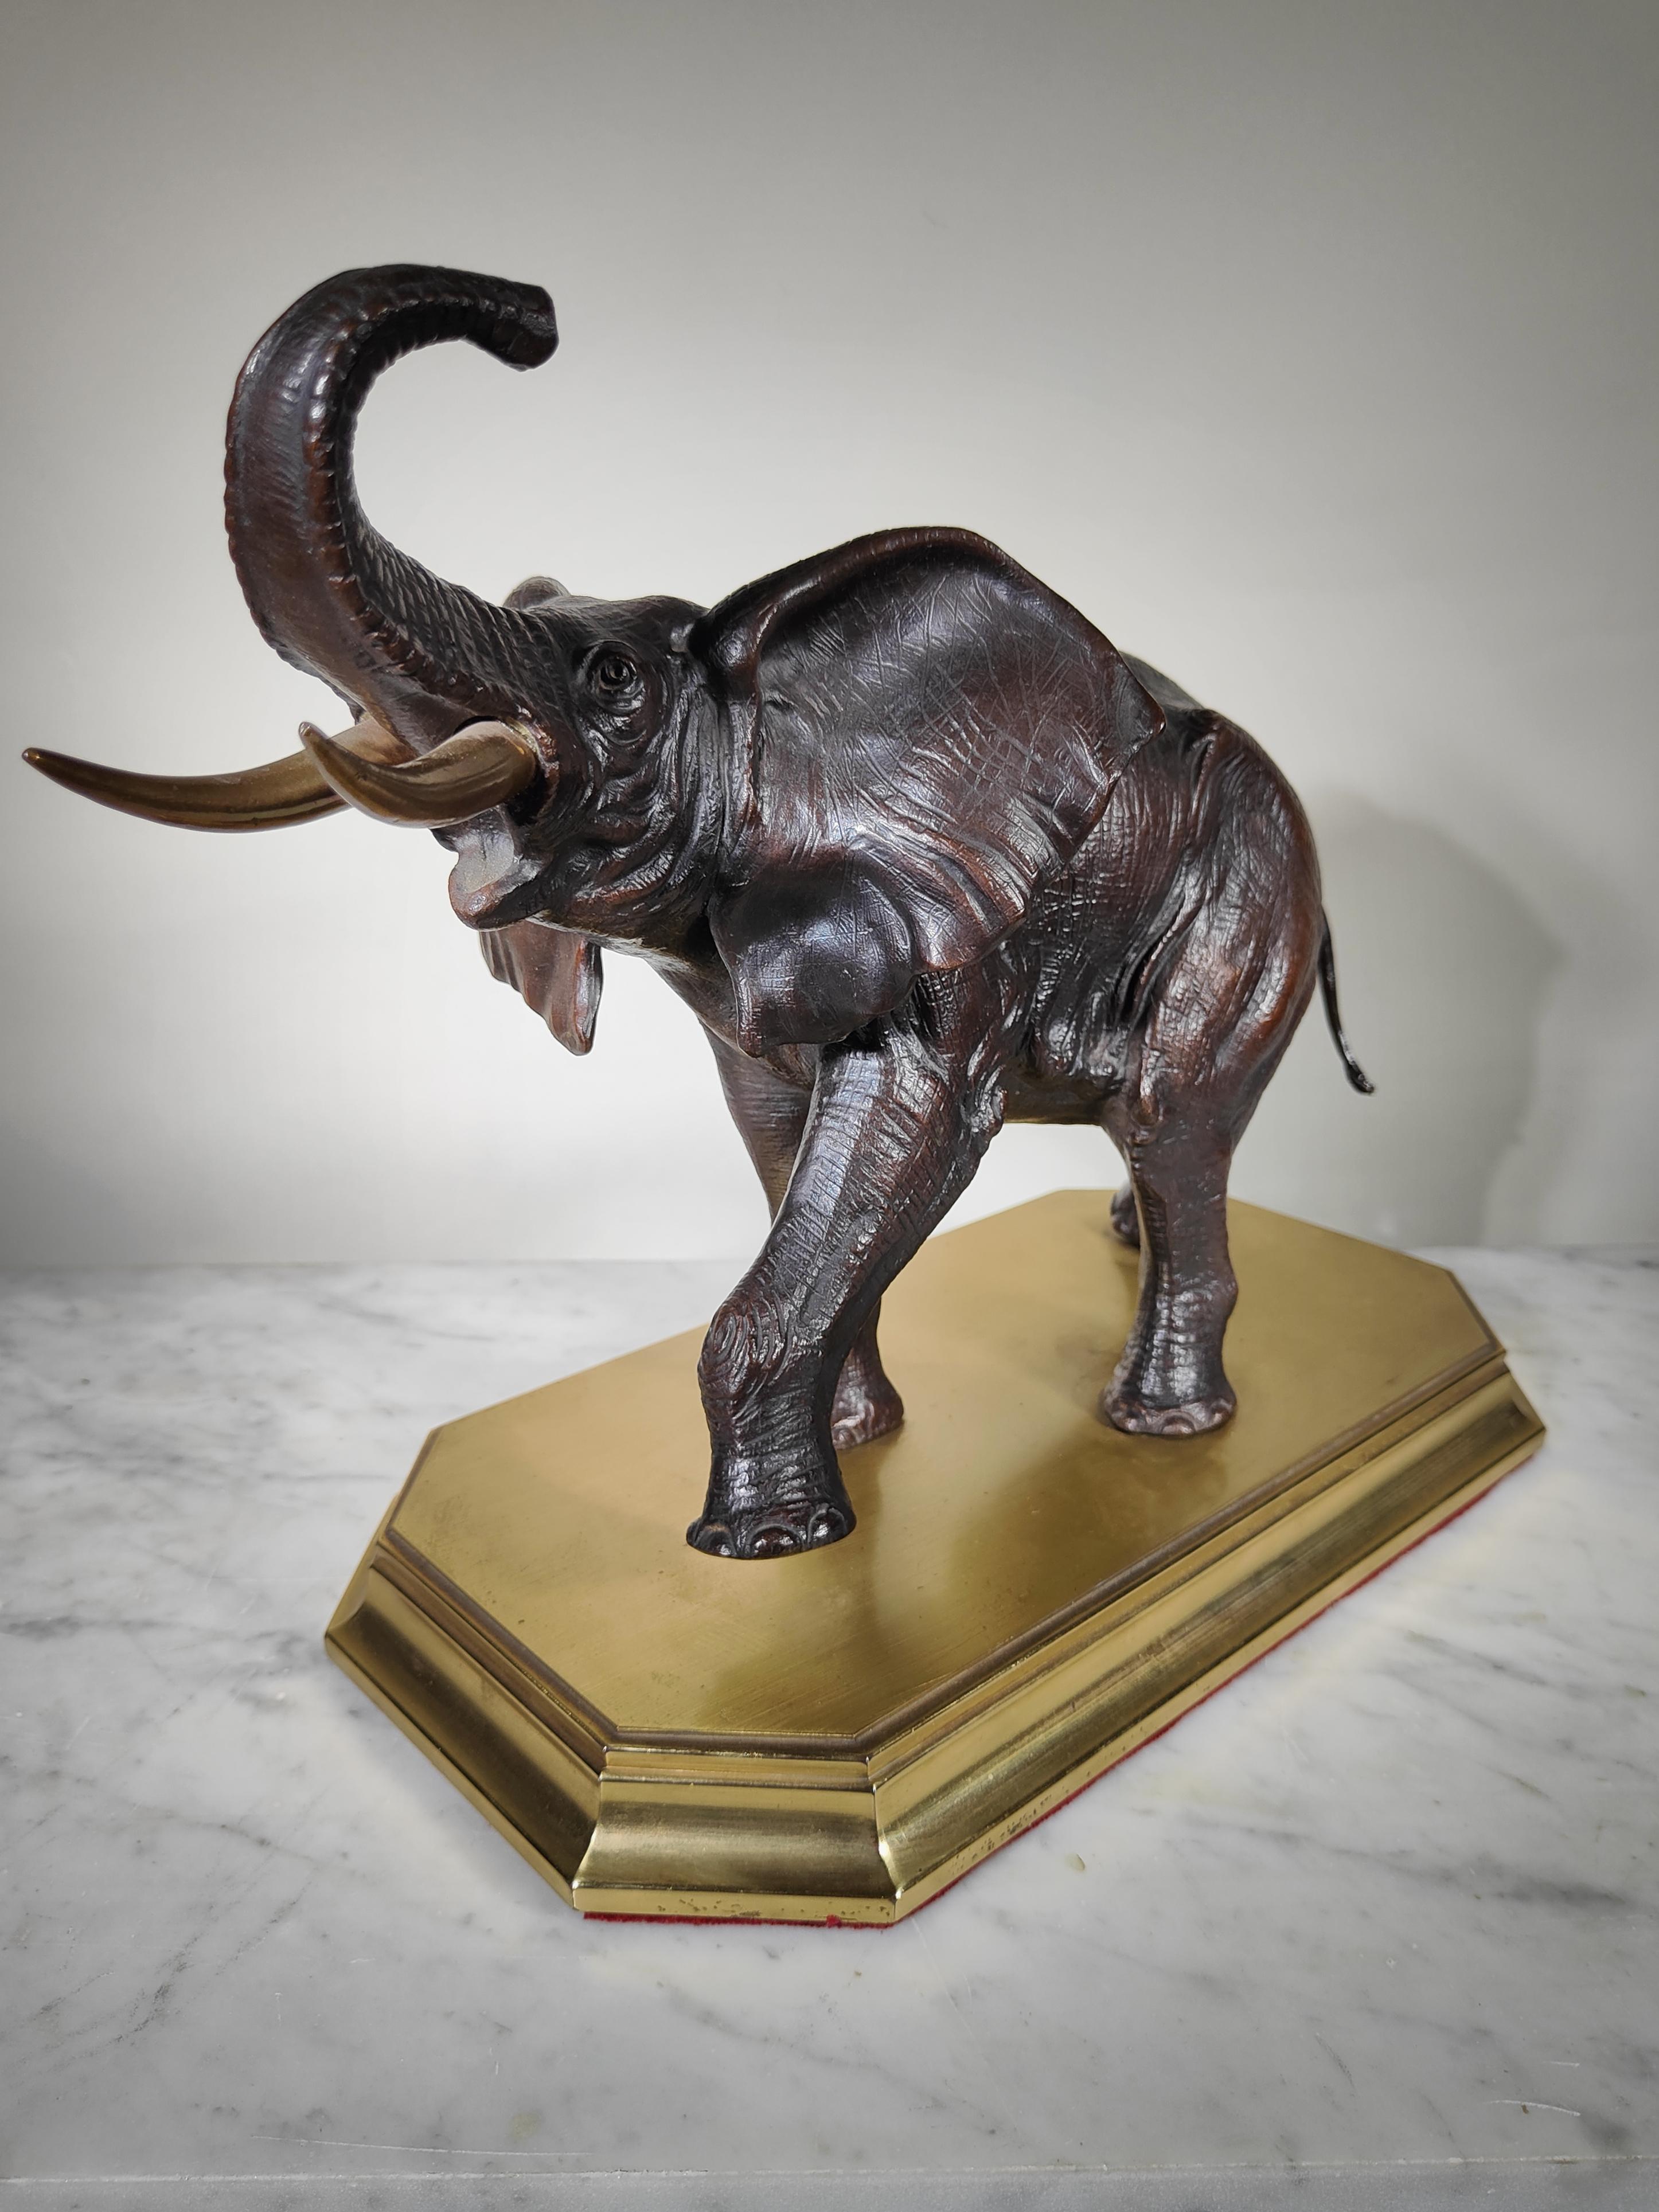 Elephant Art Deco Bronze Sculpture Early 20th Century A beautiful cast bronze sculpture of an elephant. The bronze has the original olive brown patina. It is made in France, around 1930-1940. Not signed. The sculpture has a beautiful patina and is